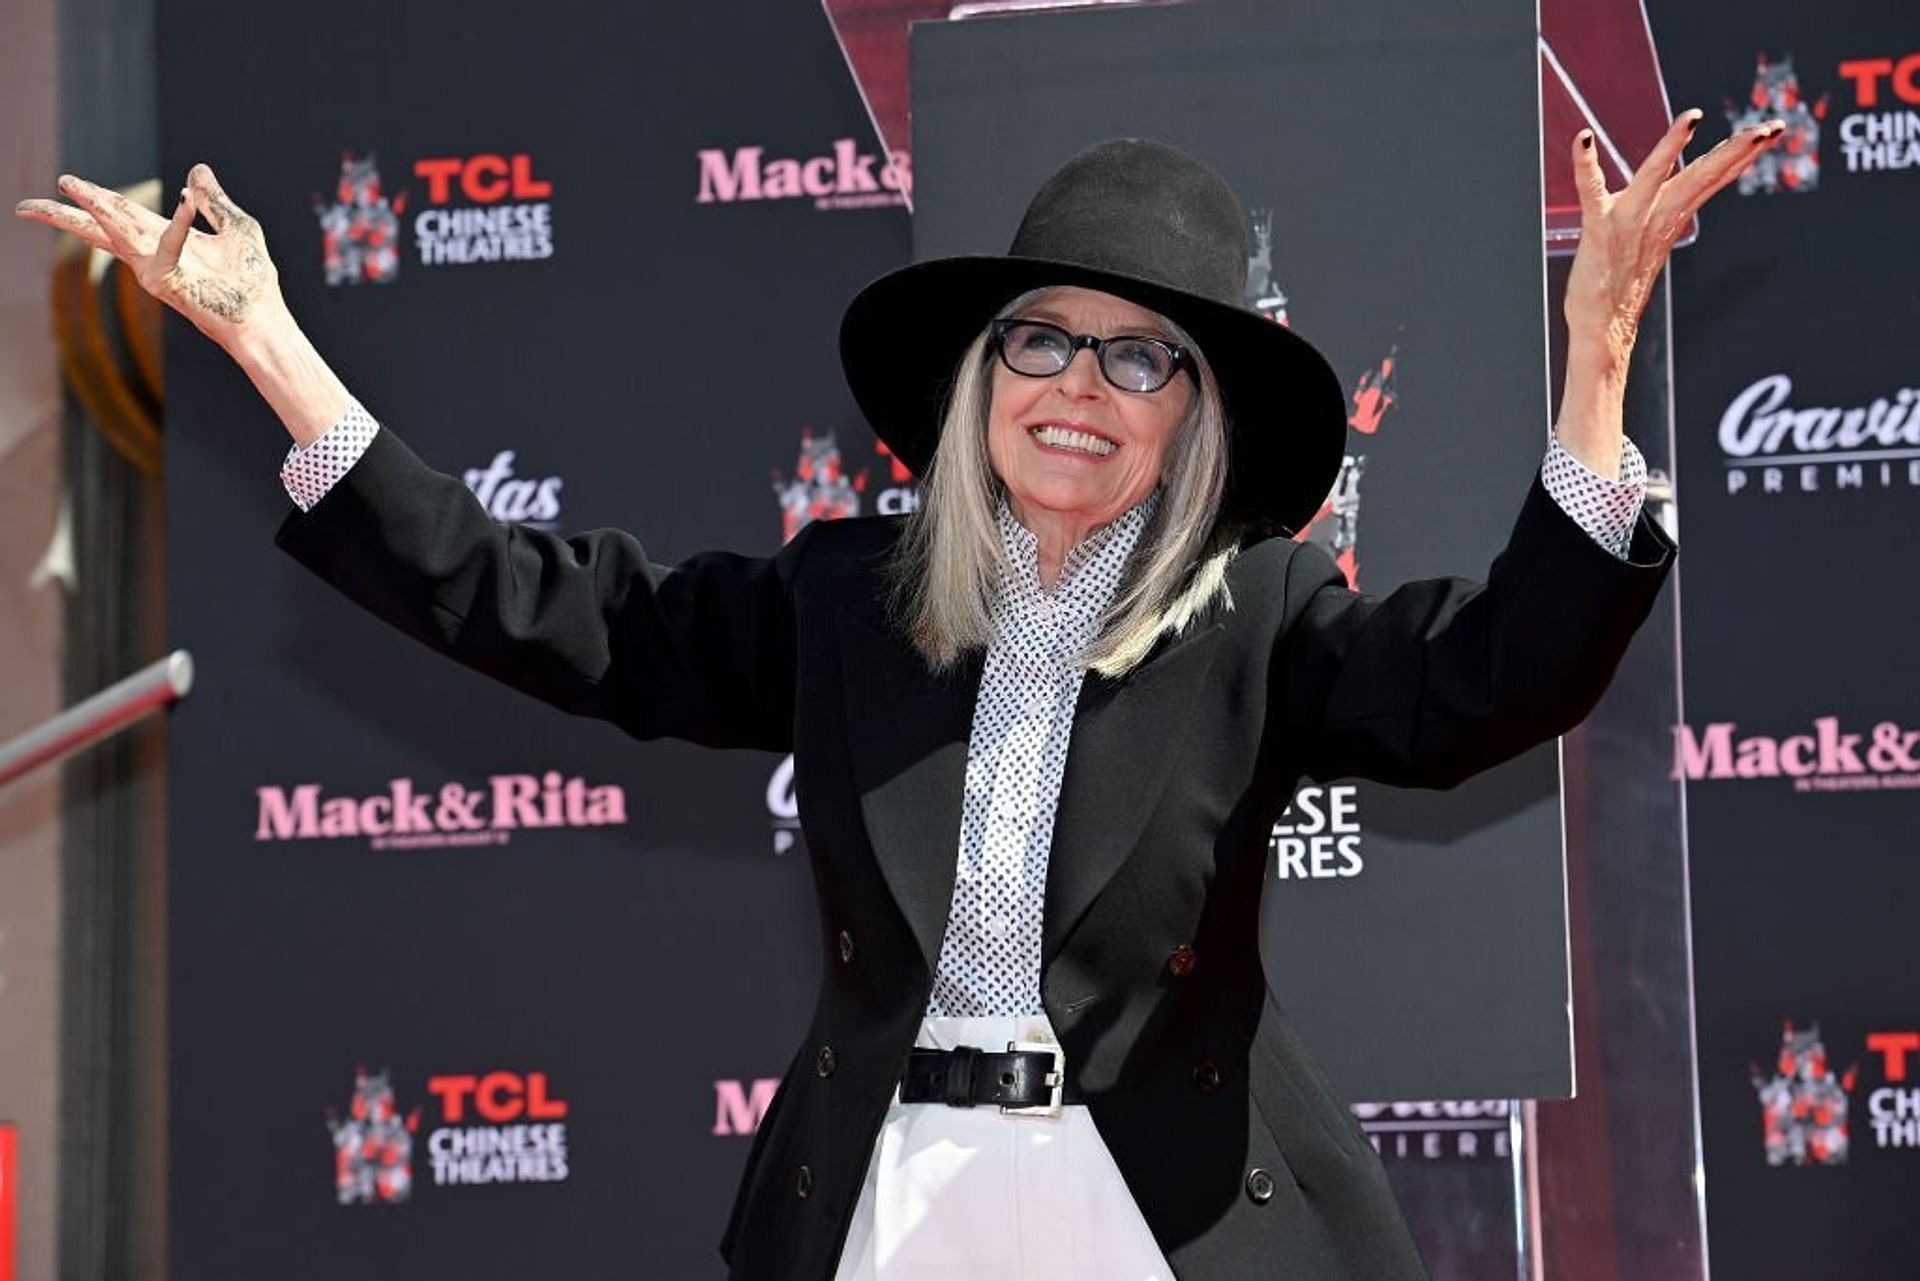 Diane Keaton was accompanied by her children at a Hollywood event (Image via Axelle/Bauer-Griffin/Getty Images)